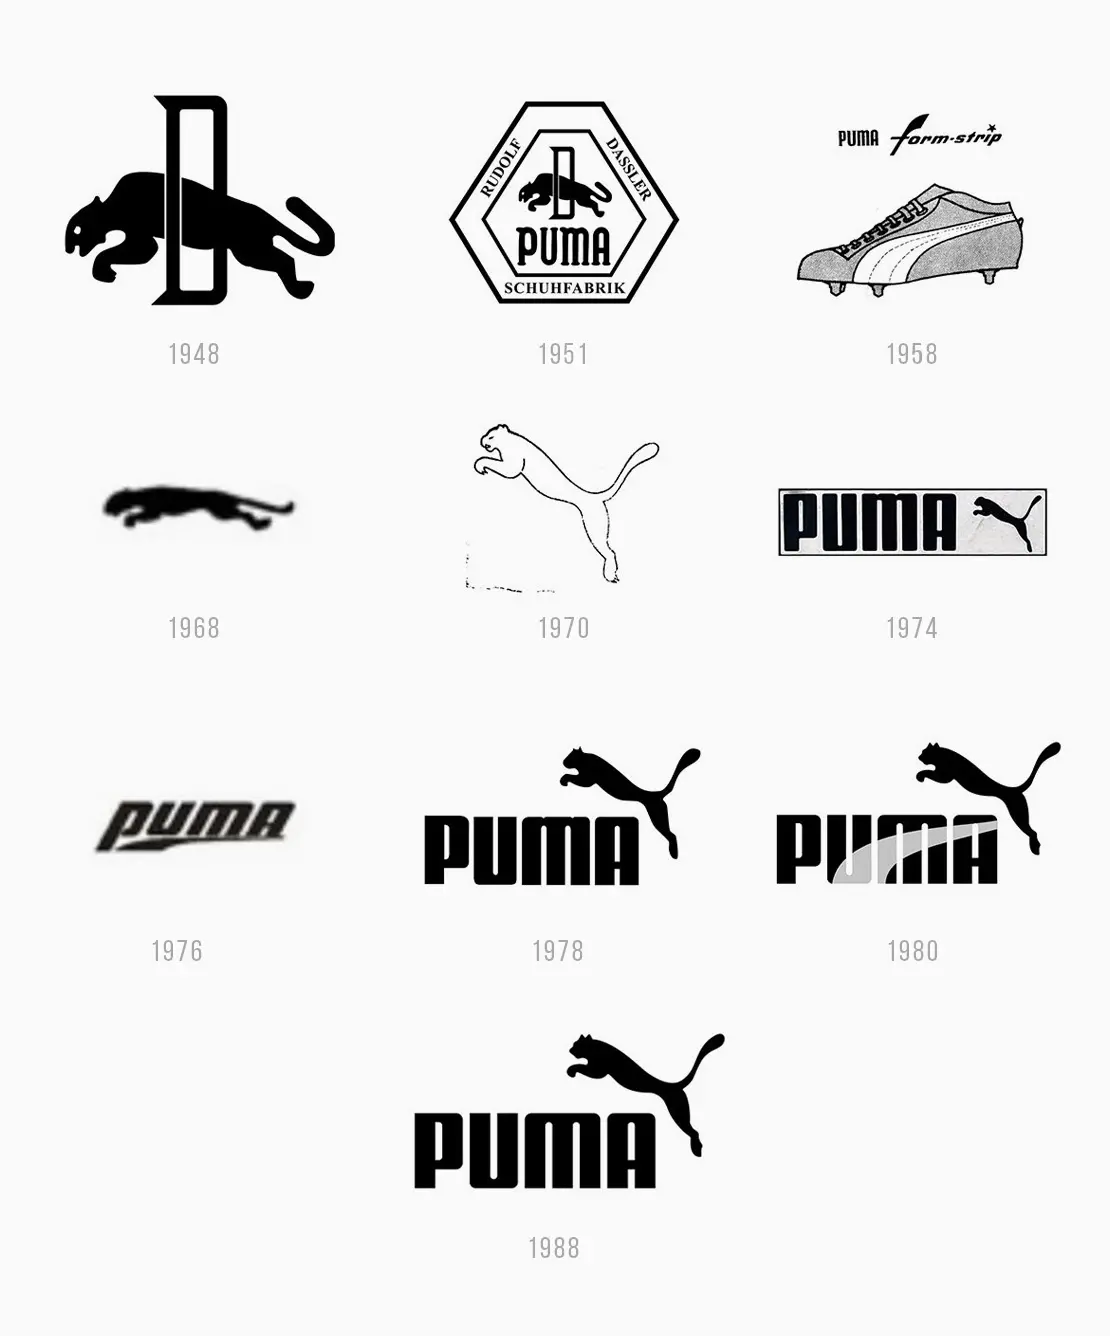 puma history and background